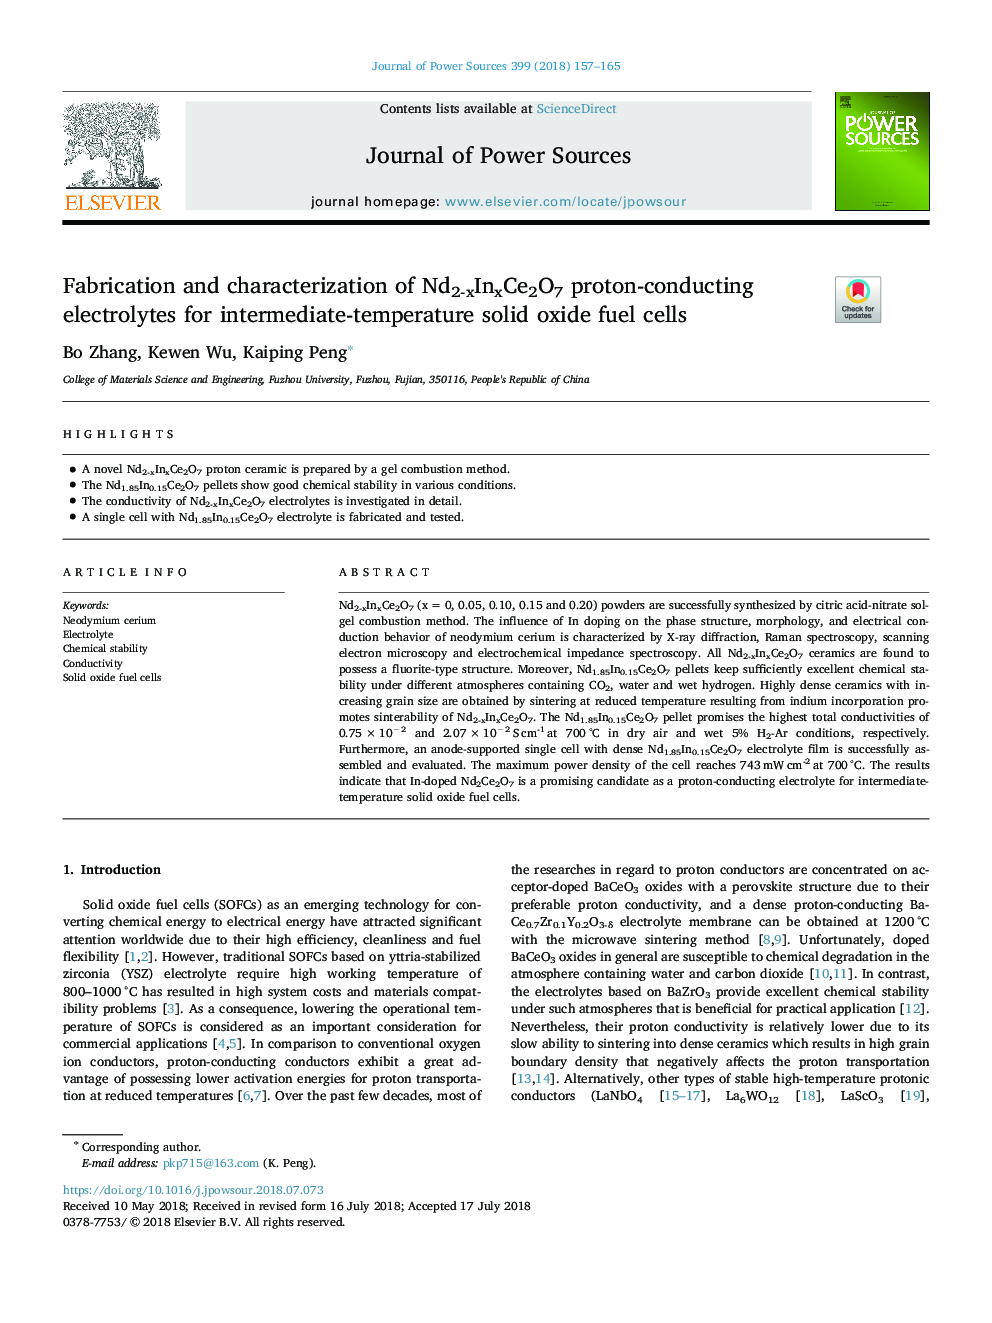 Fabrication and characterization of Nd2-xInxCe2O7 proton-conducting electrolytes for intermediate-temperature solid oxide fuel cells